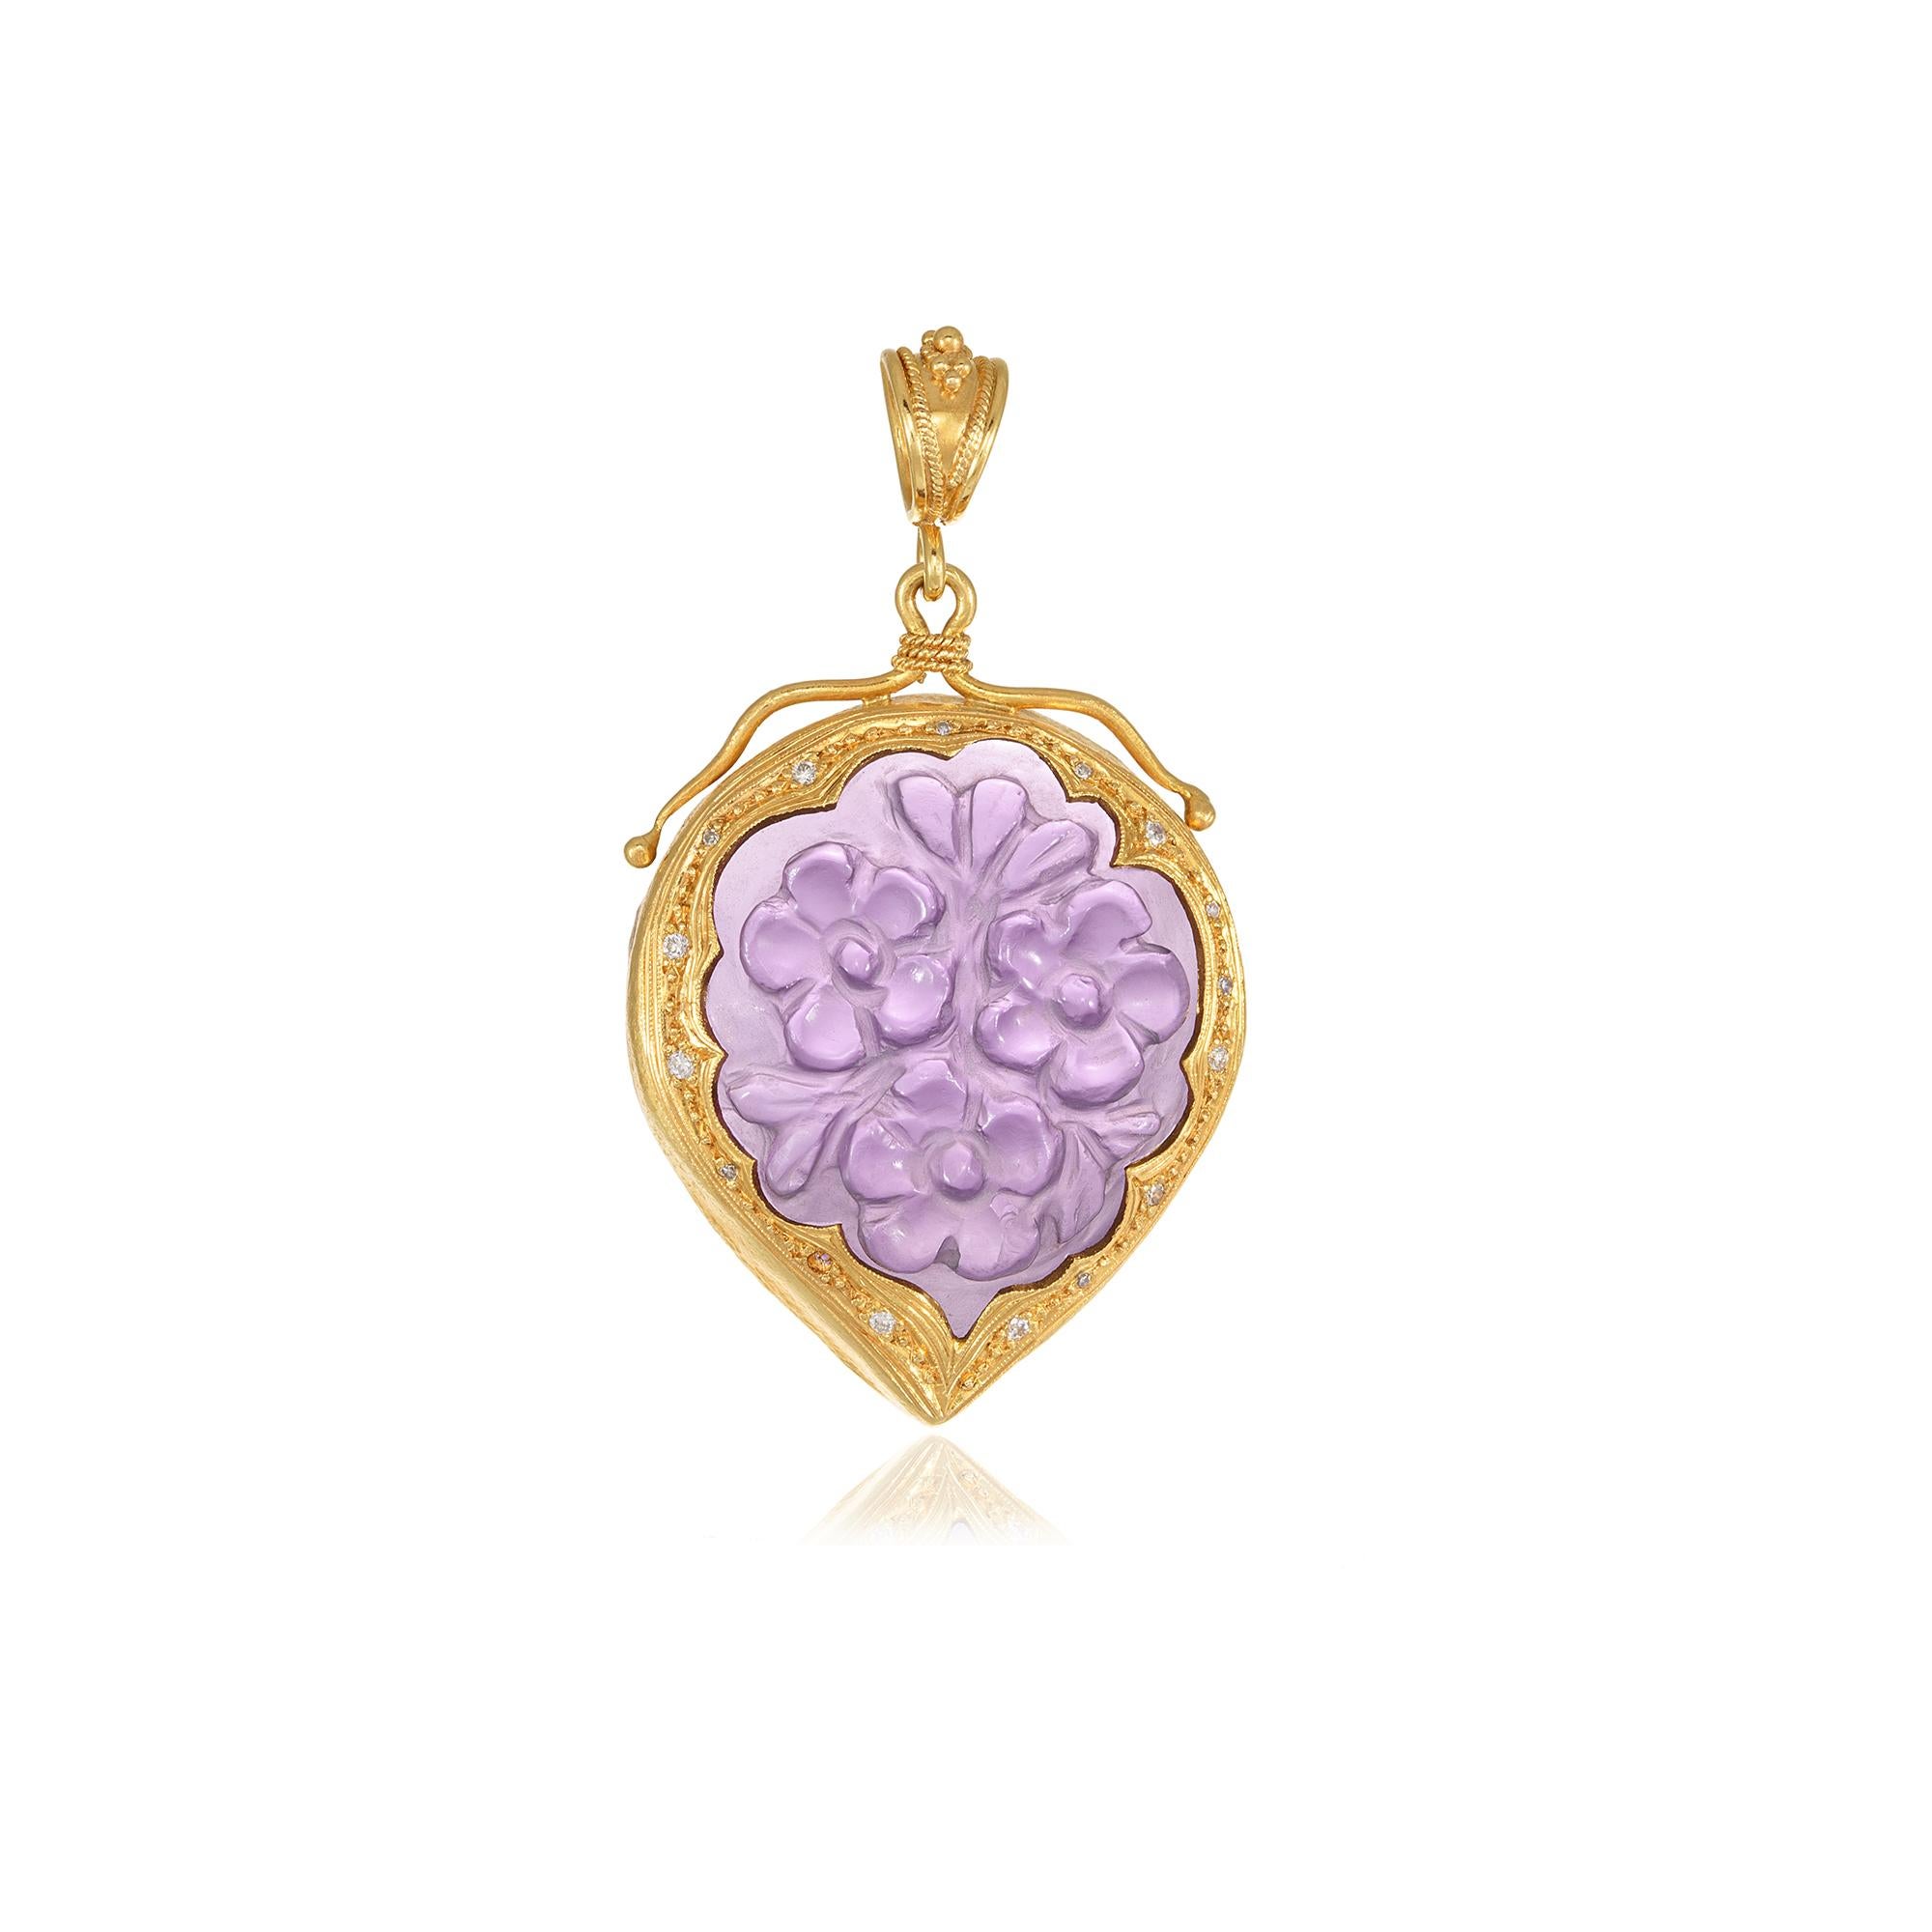 Drop shape filigree flower pendant handcrafted in 22Kt yellow gold featuring hand Carved Amethyst and brilliant cut Diamonds. Carved flowers, fine and simple, decorate the Amethyst in the heart of this chic pendant while some filigree details around